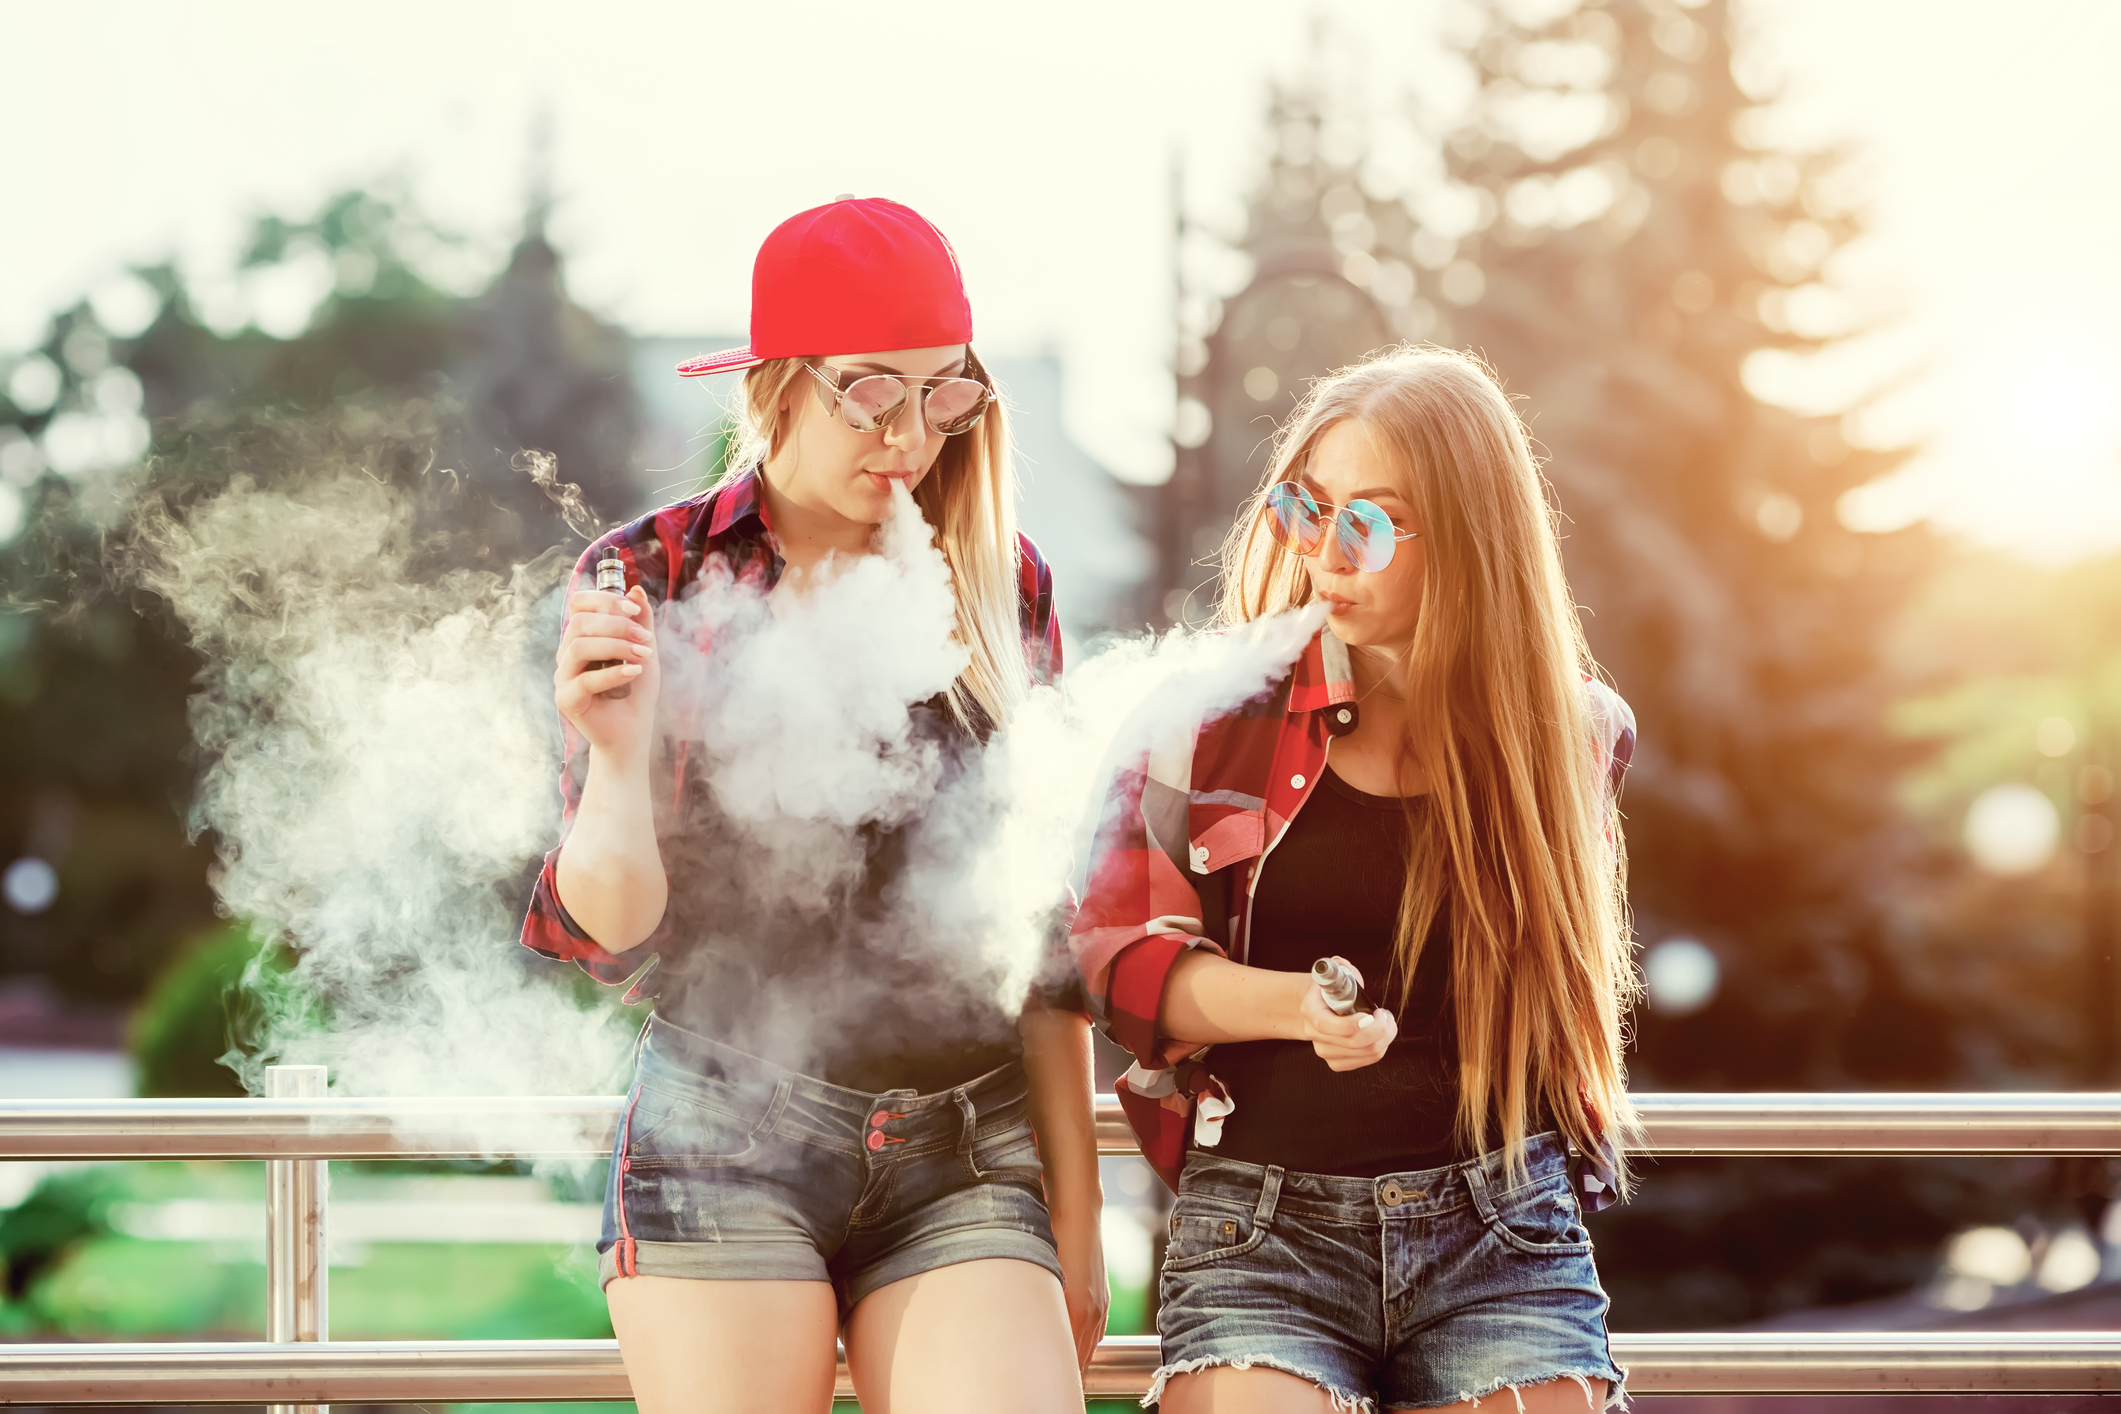 FDA weighs in on youth use of eCigs, vaping